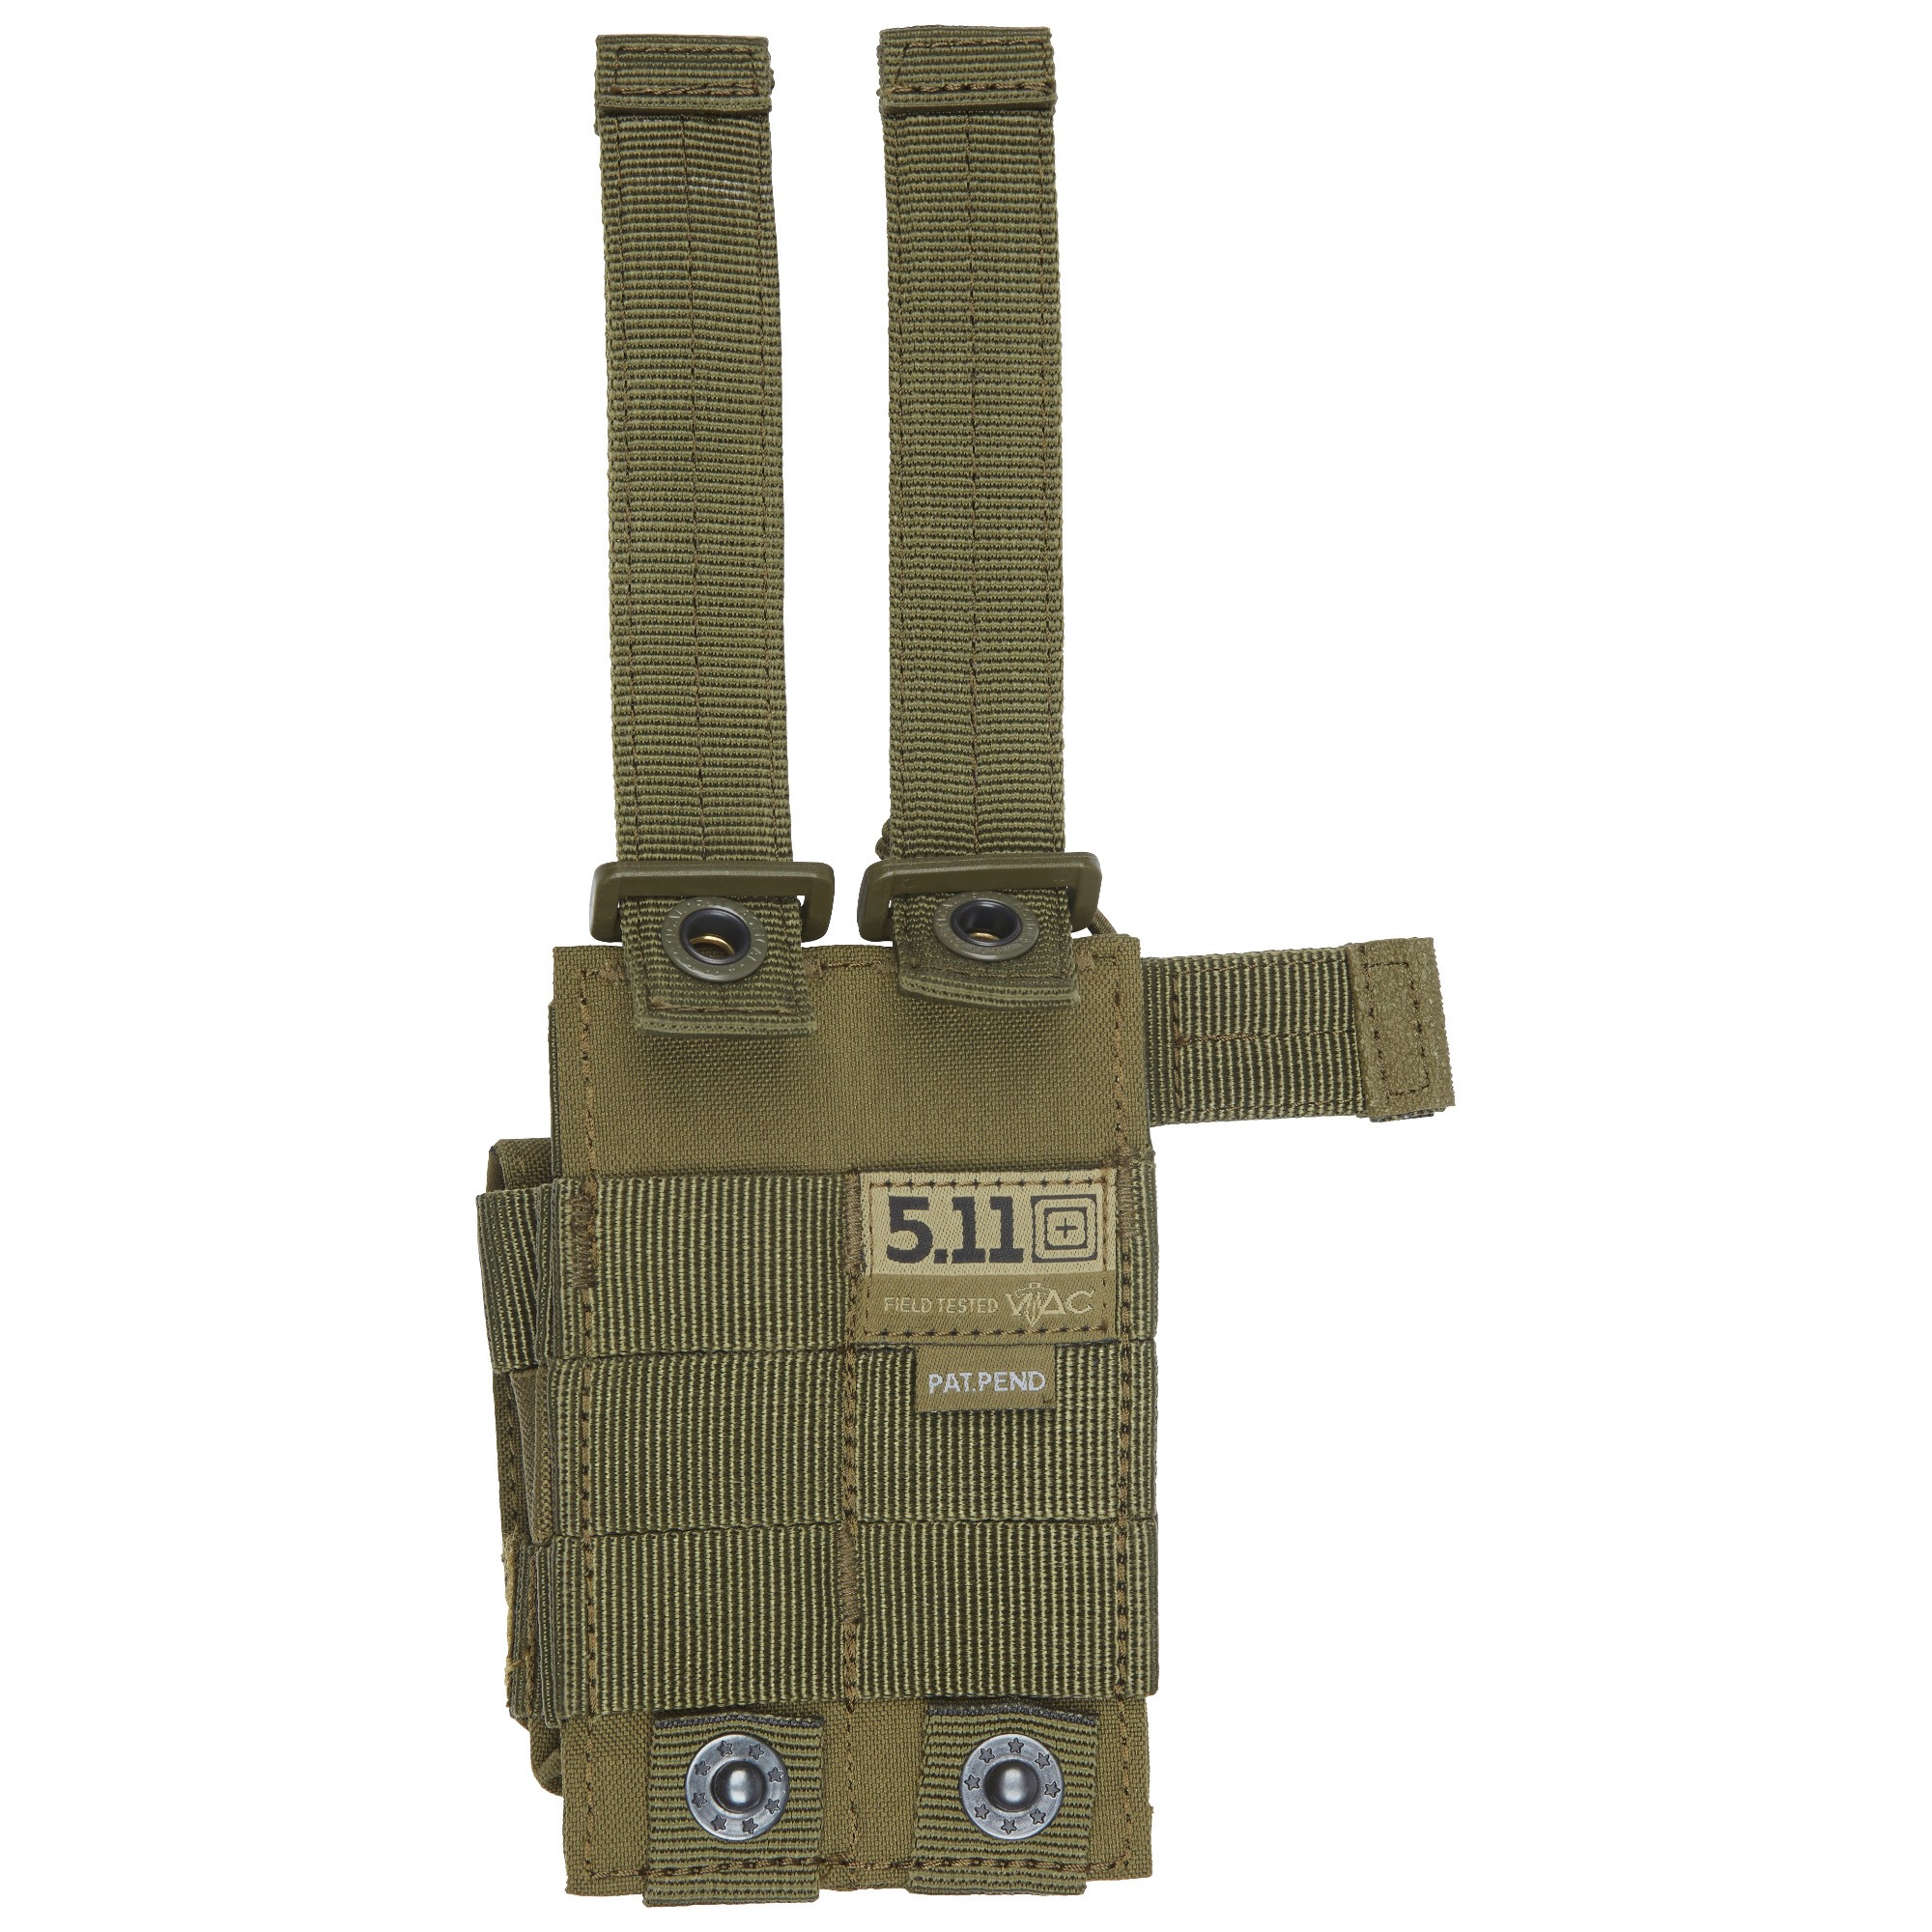 5.11 Double Pistol Bungee/Covert Pouch